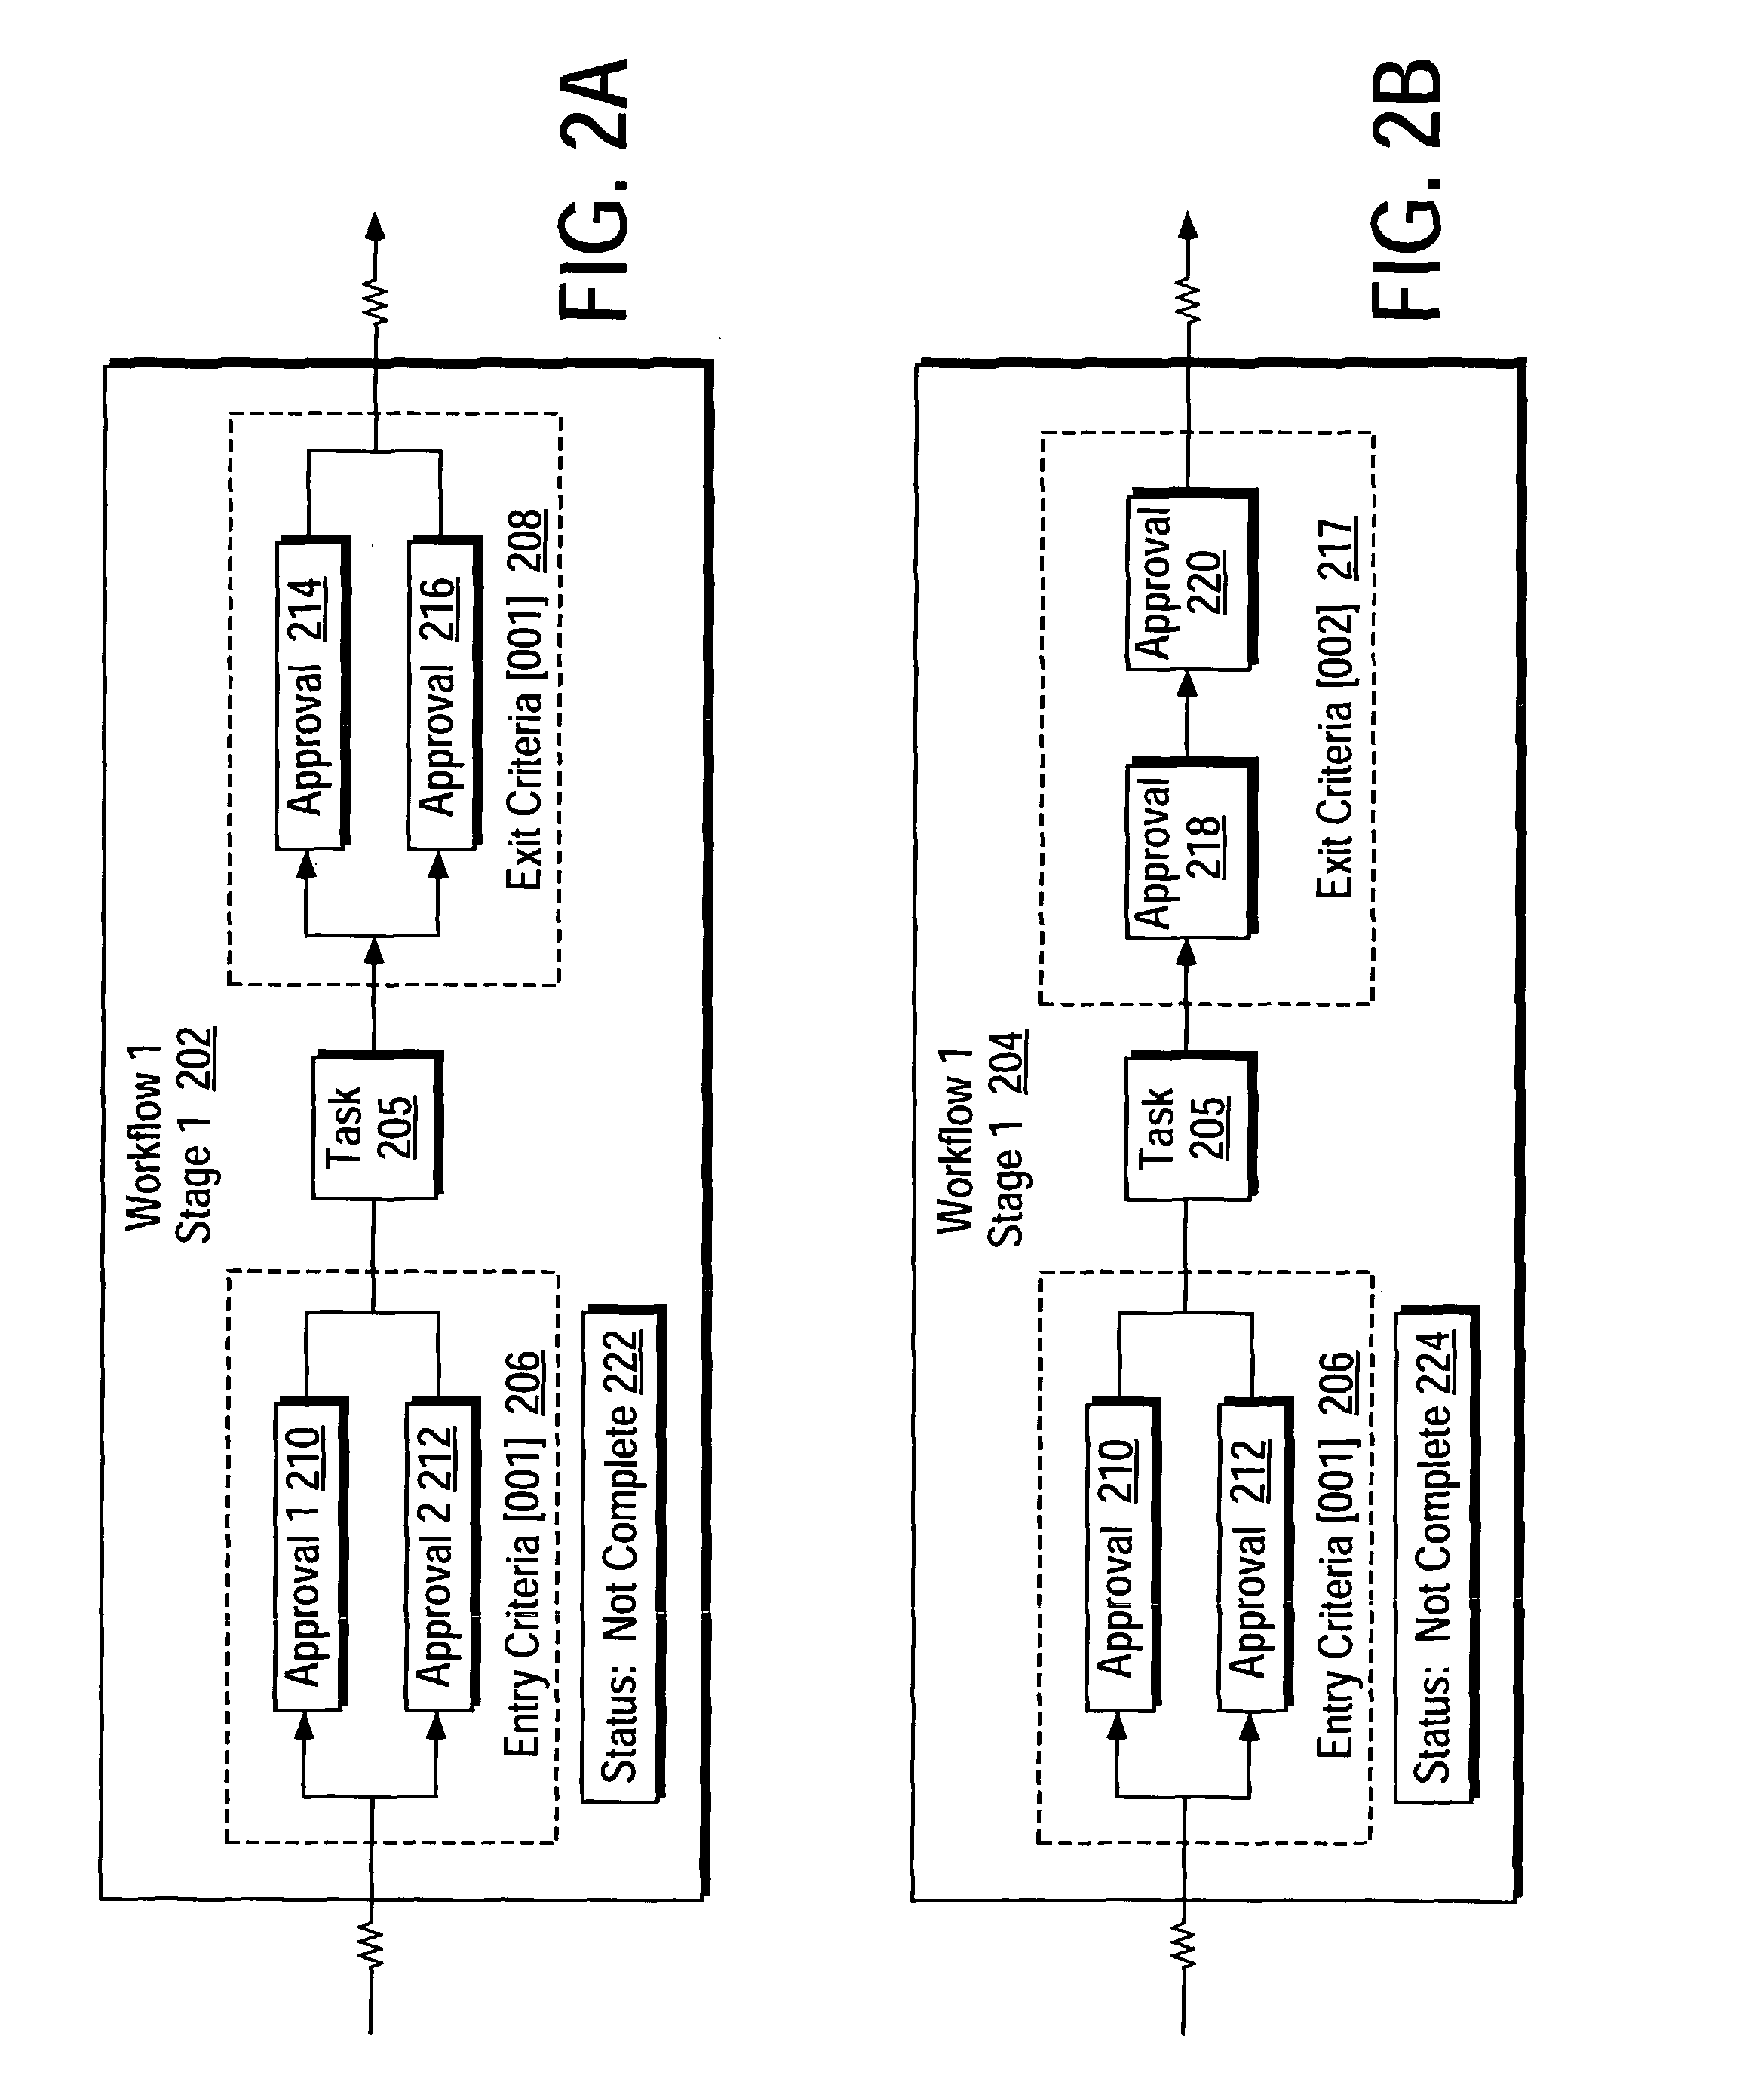 System and method for managing and monitoring multiple workflows